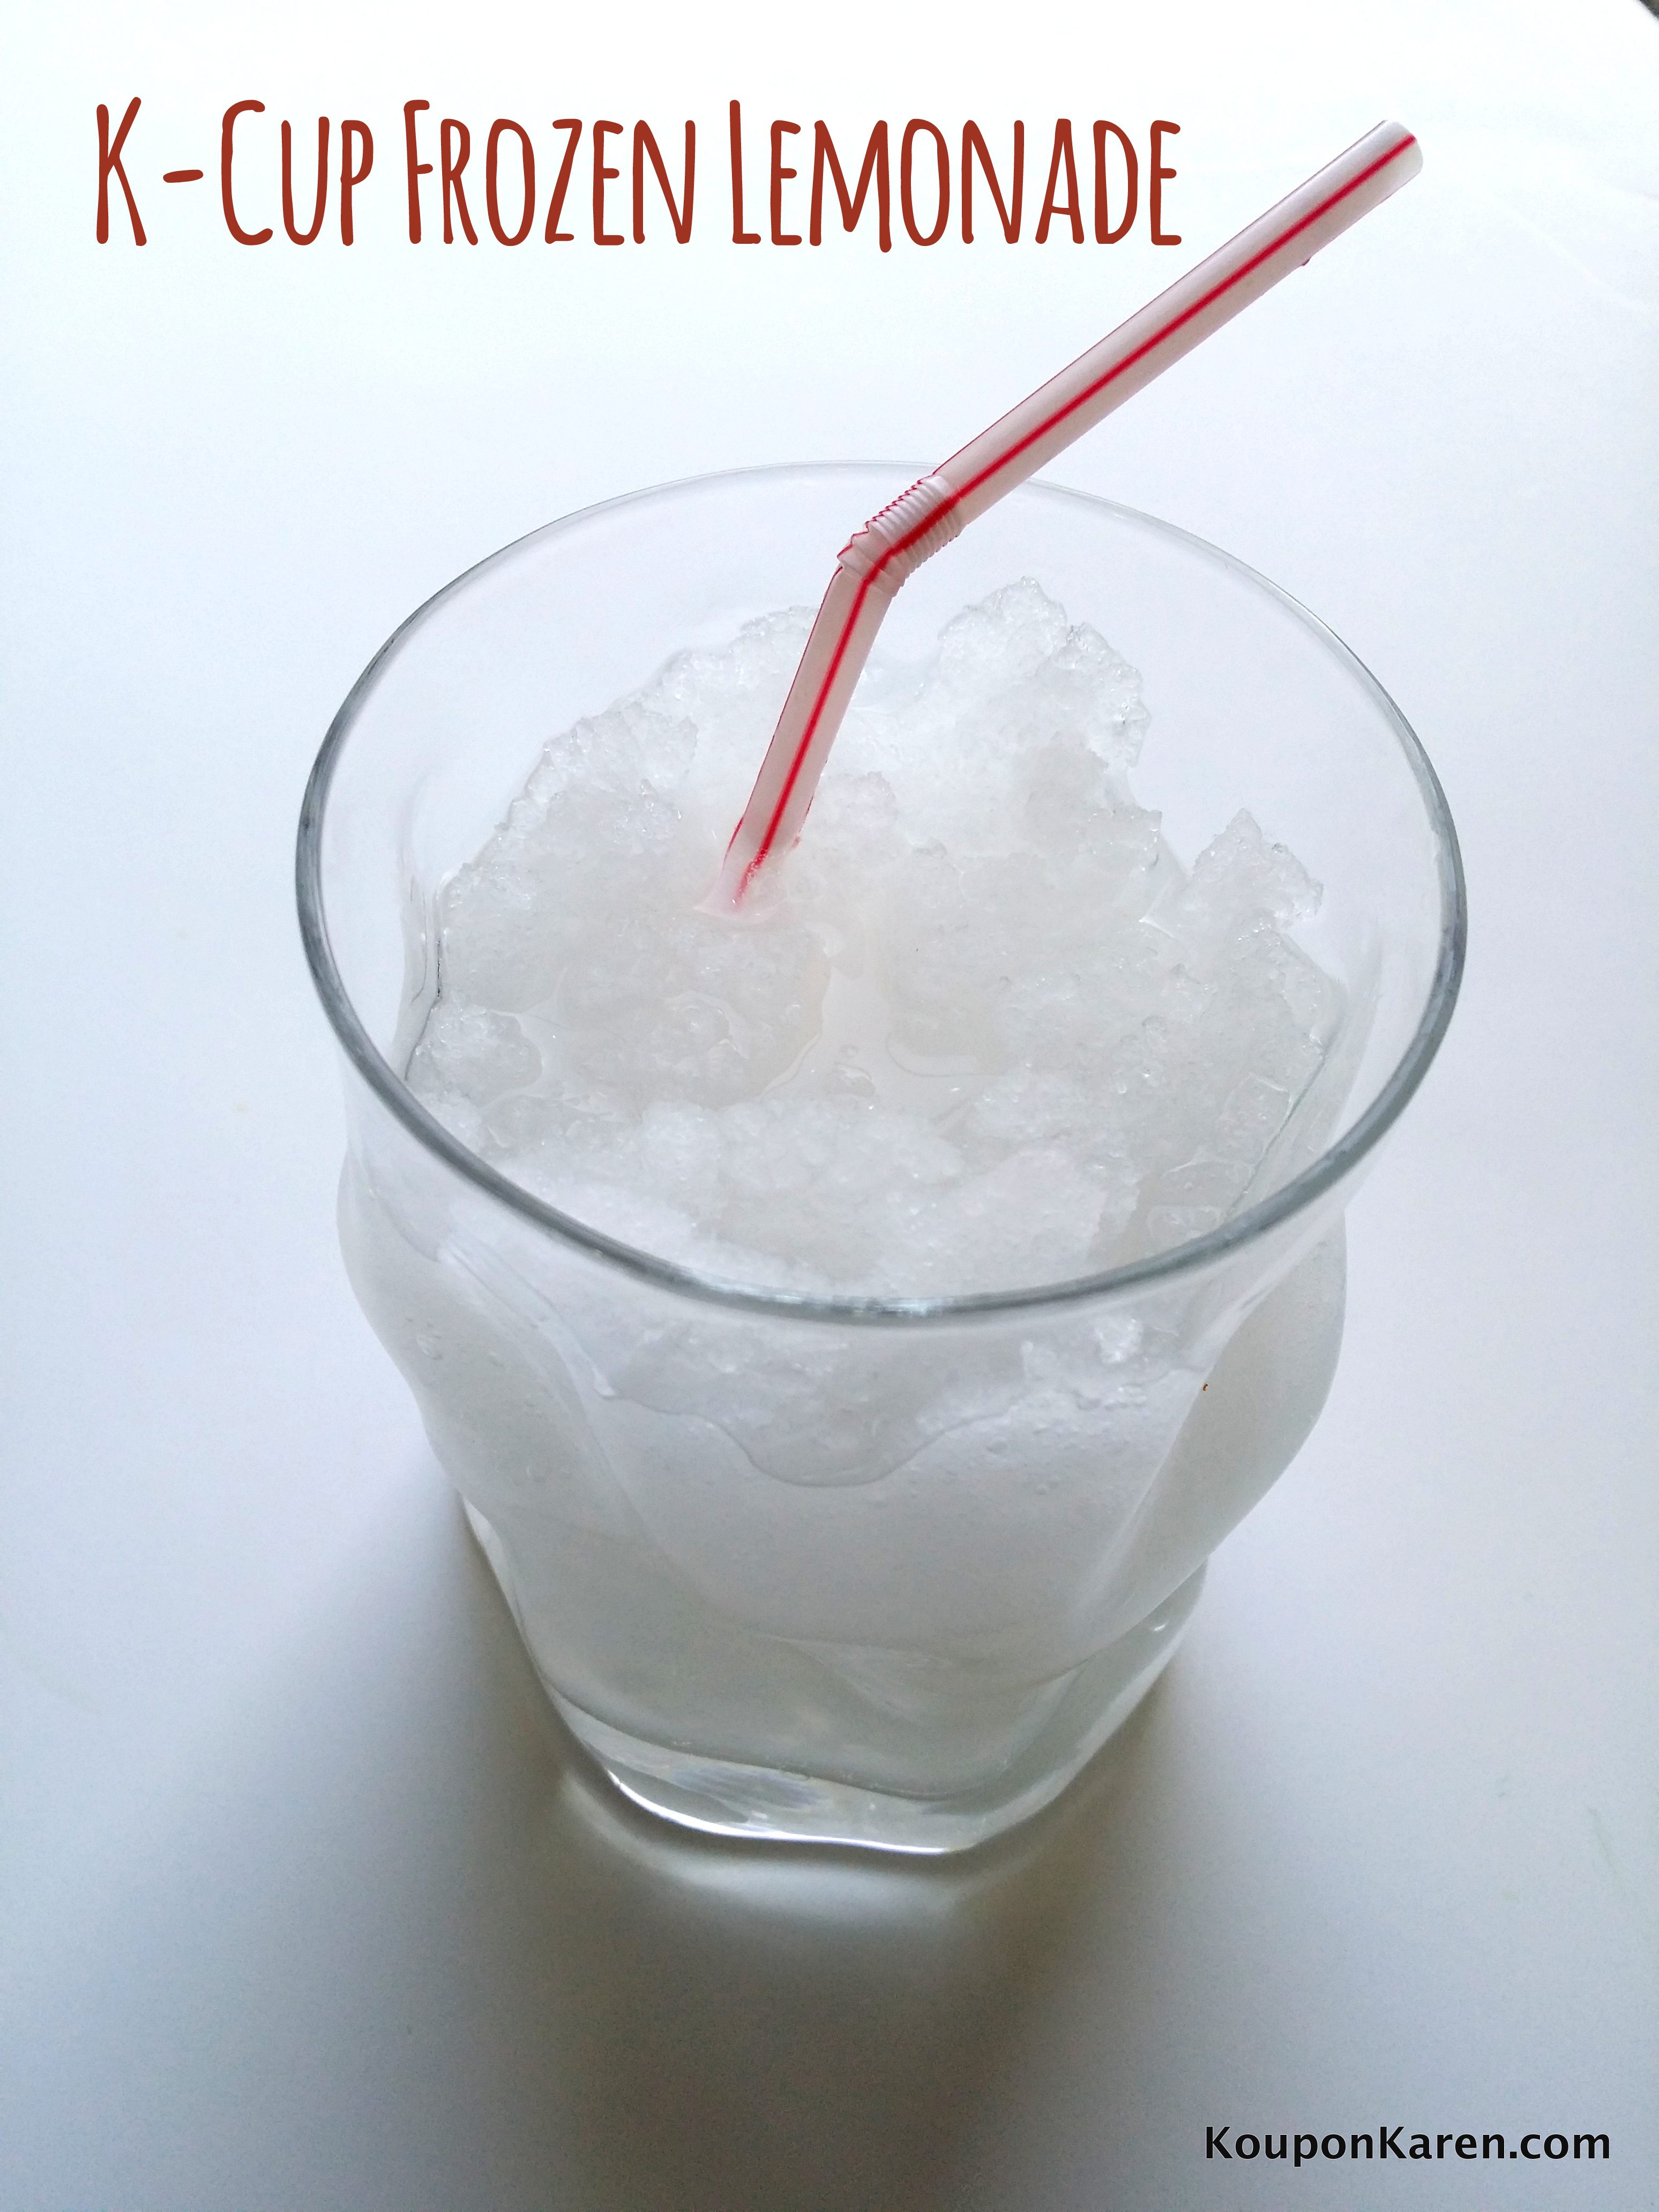 Frozen Lemonade Recipe {Made with a K-cup!}